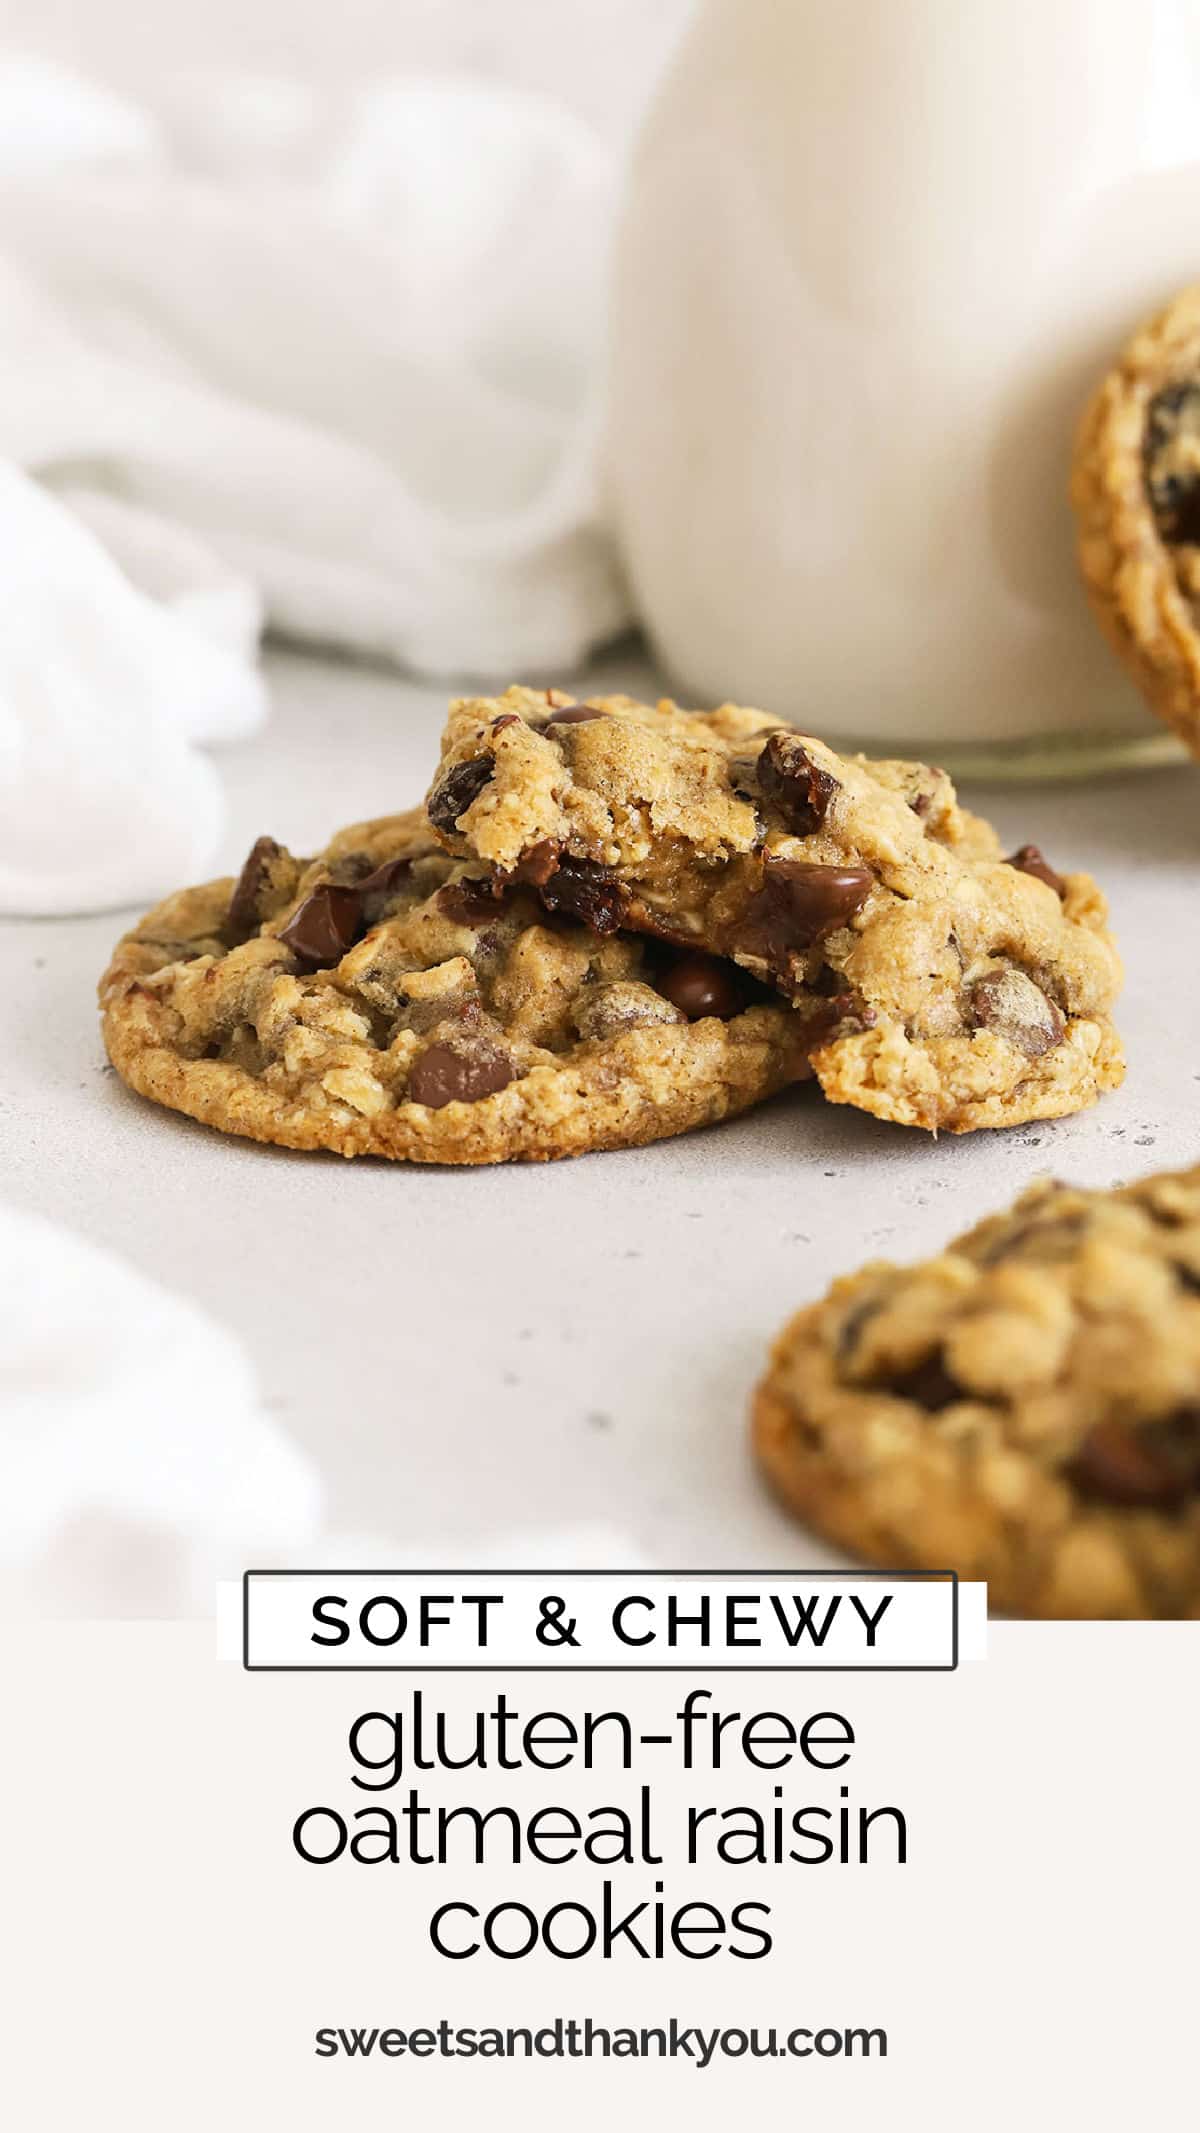 This soft, chewy gluten-free oatmeal raisin cookies recipe is the perfect one to satisfy your nostalgic cookie craving! Loaded with oats, raisins, cinnamon, and even some chocolate, it's easy, delicious, and classic! / gluten-free oatmeal raisin chocolate chip cookies / gluten-free oatmeal cookies / gluten-free cookie recipe / 